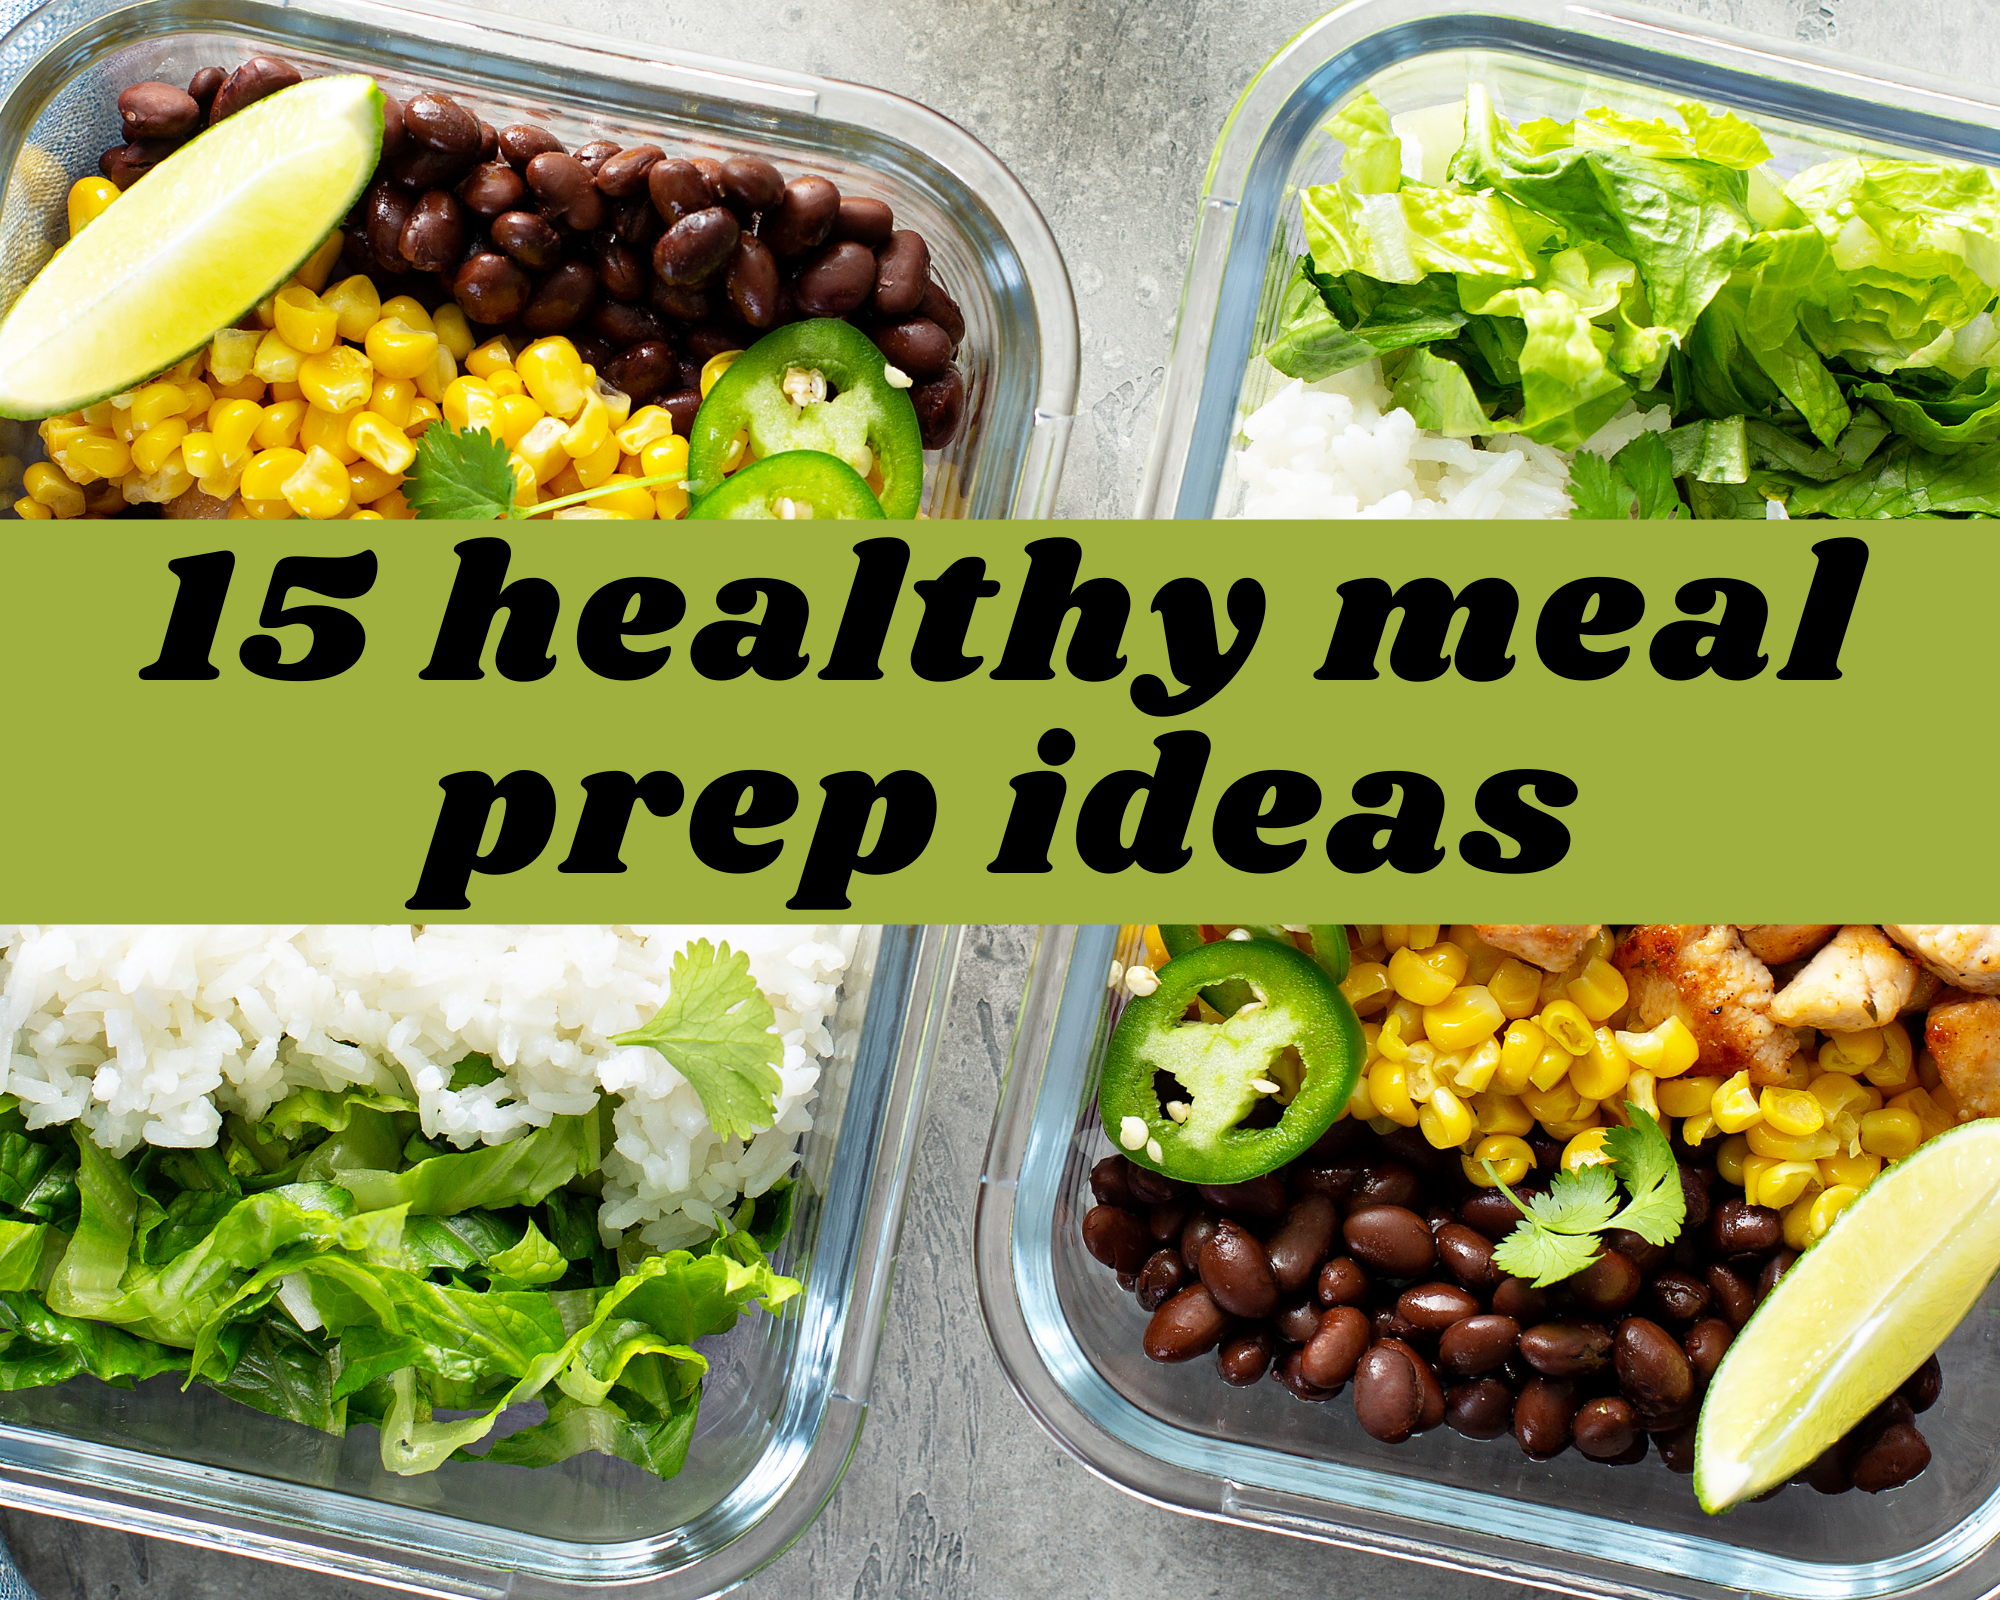 https://www.justapinch.com/blog/wp-content/uploads/2021/01/4a8f985f-15-healthy-meal-prep-ideas.png